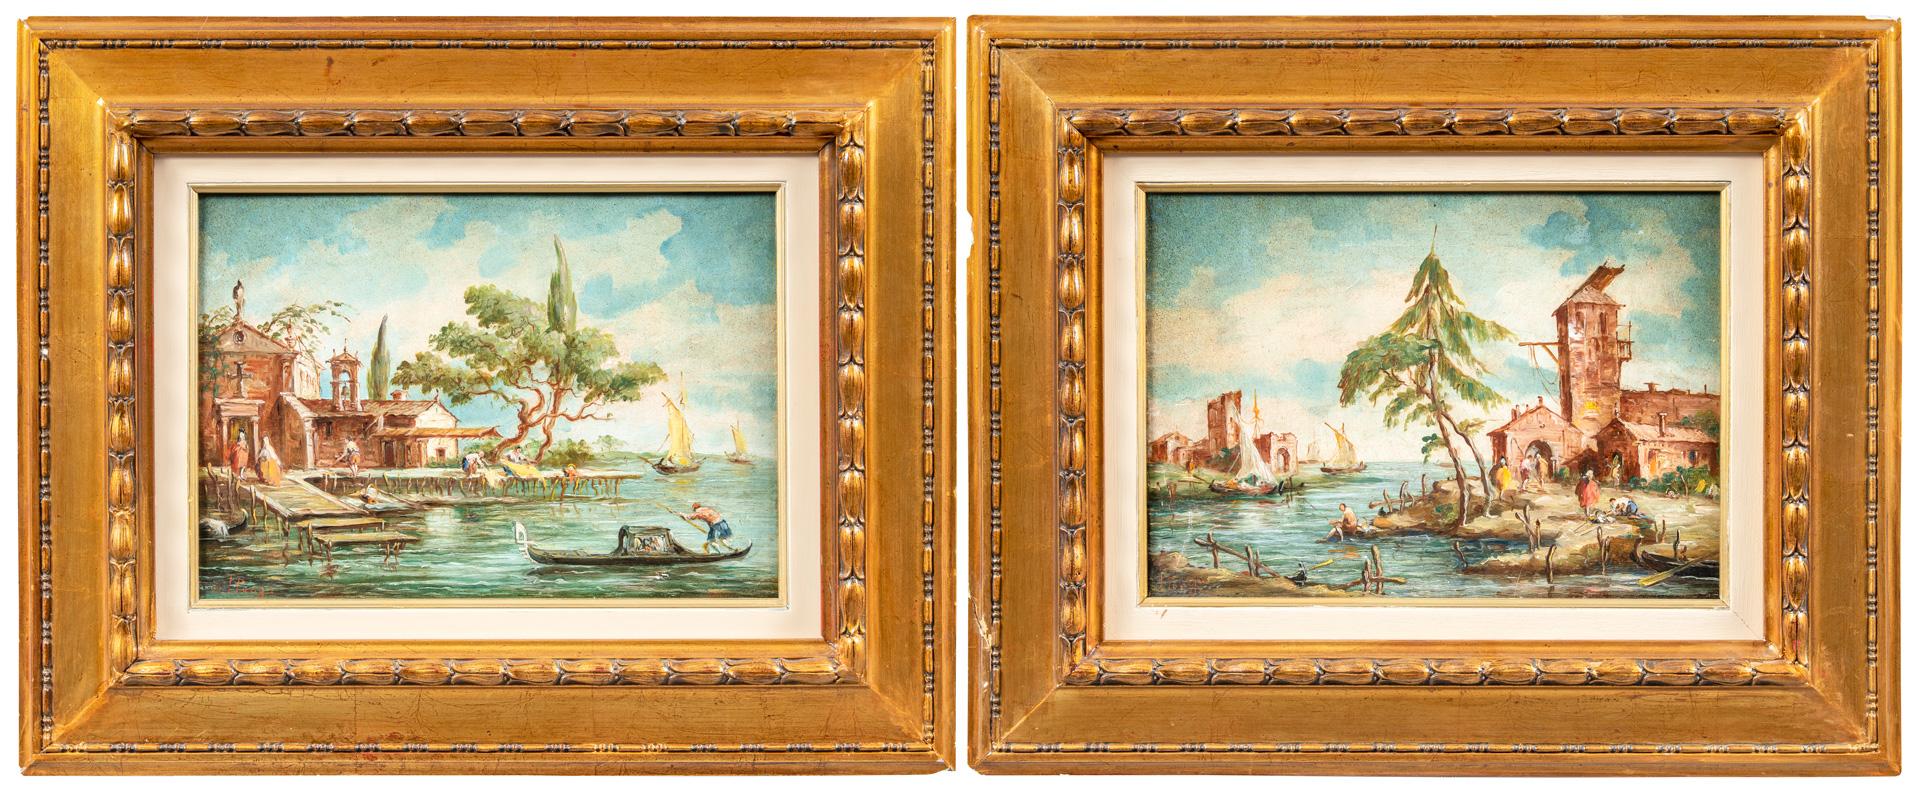 Lucia Ponga degli Ancillo (Venice 1887 - 1966) - Venice, imaginative views.

25 x 35 cm without frames, 44.5 x 55 cm with frames.

Pair of antique oil paintings on wood, in wooden frames.

- Works signed on the lower left: "L. Ponga".

Condition